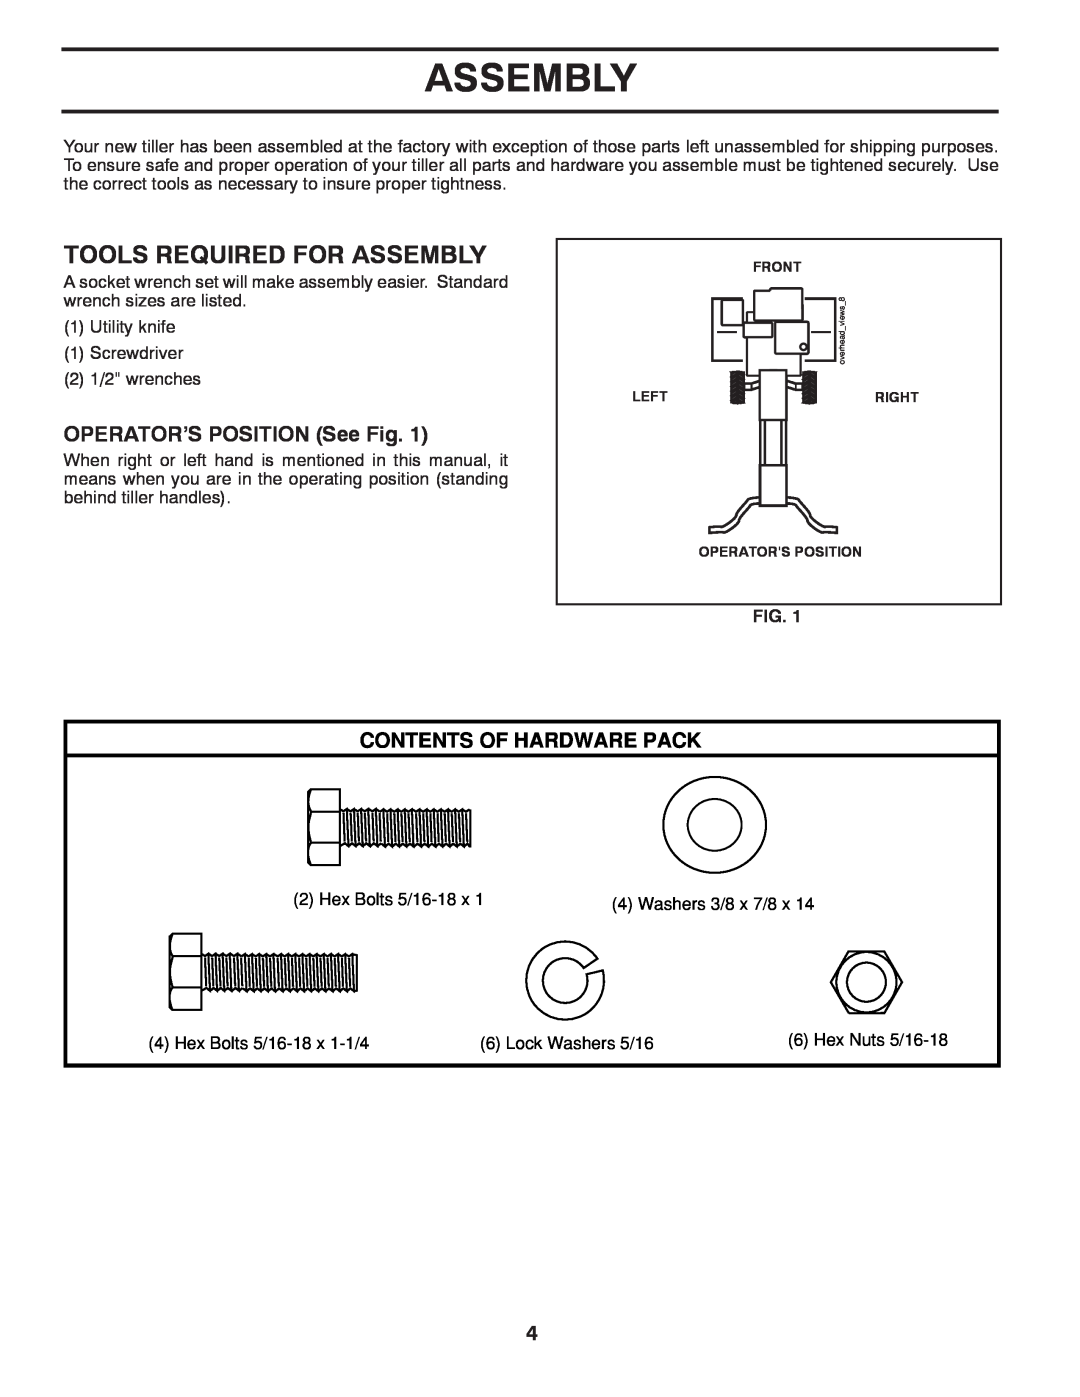 Poulan HDF800X manual Tools Required For Assembly, OPERATOR’S POSITION See Fig, Contents Of Hardware Pack 